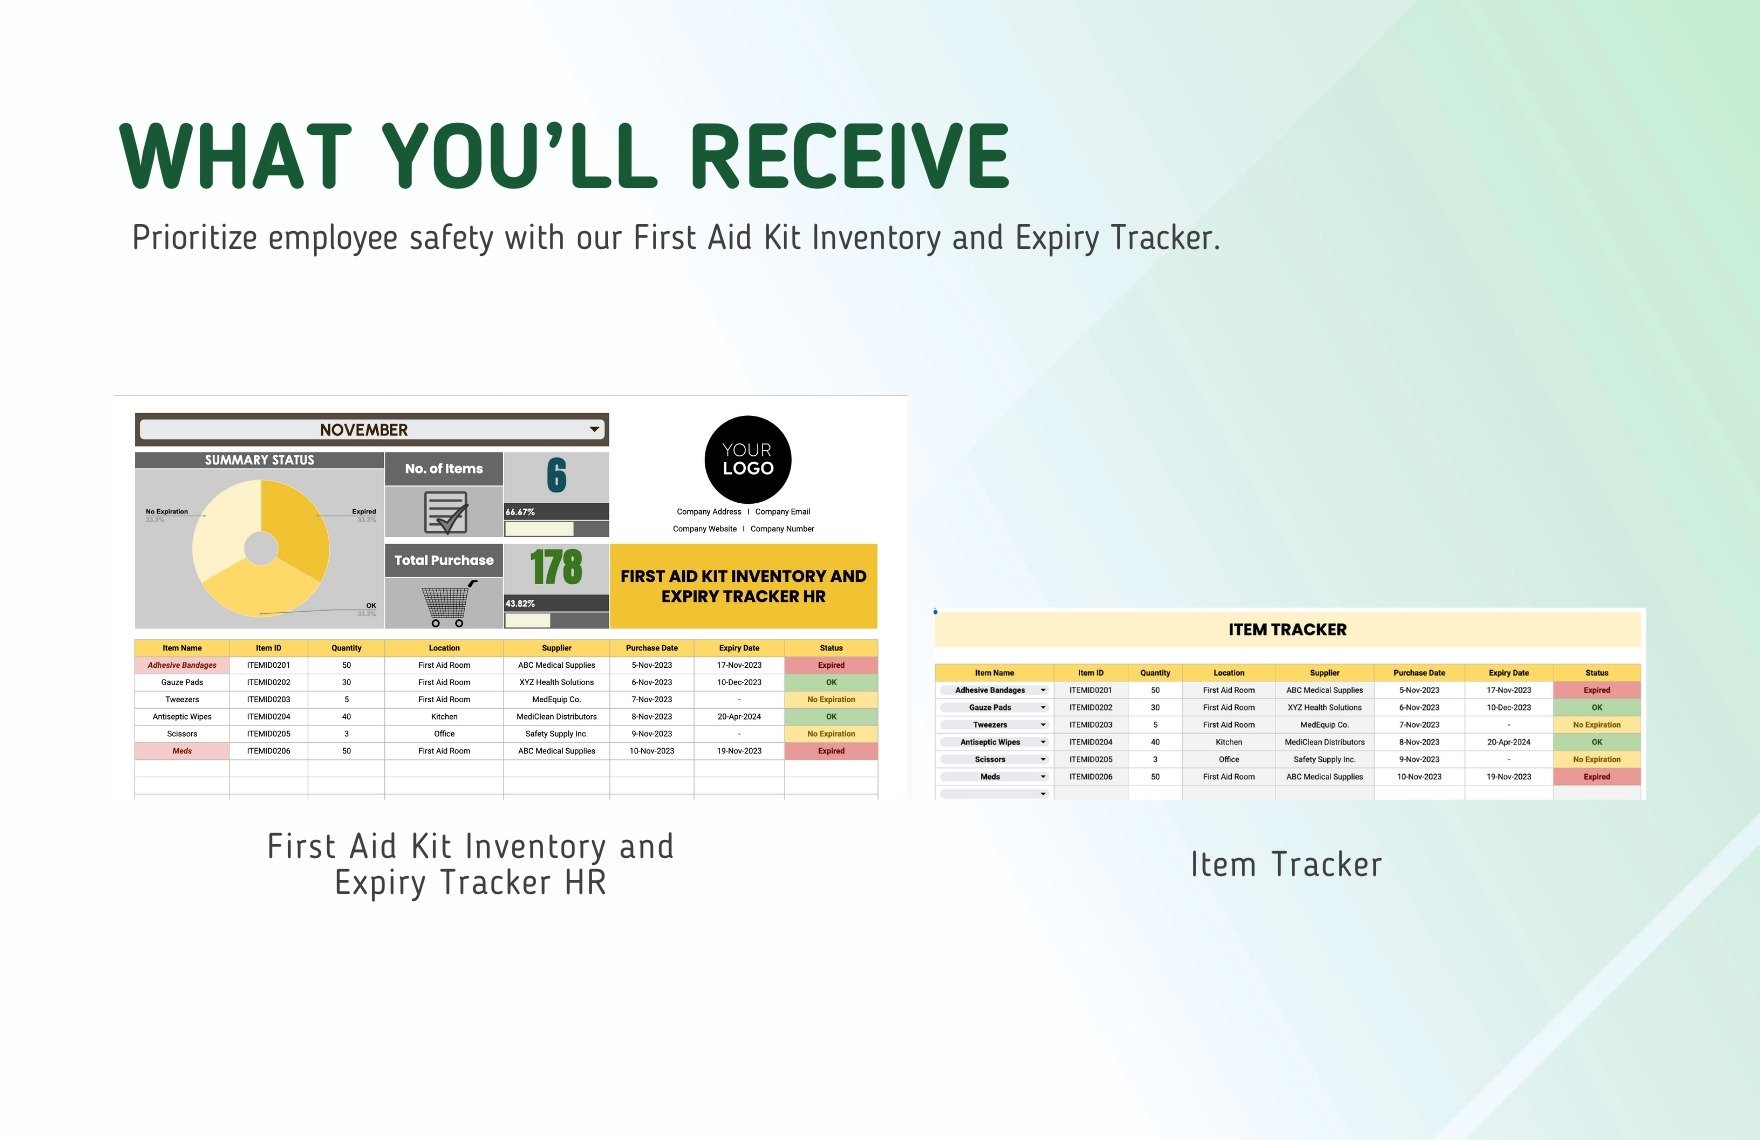 First Aid Kit Inventory and Expiry Tracker HR Template